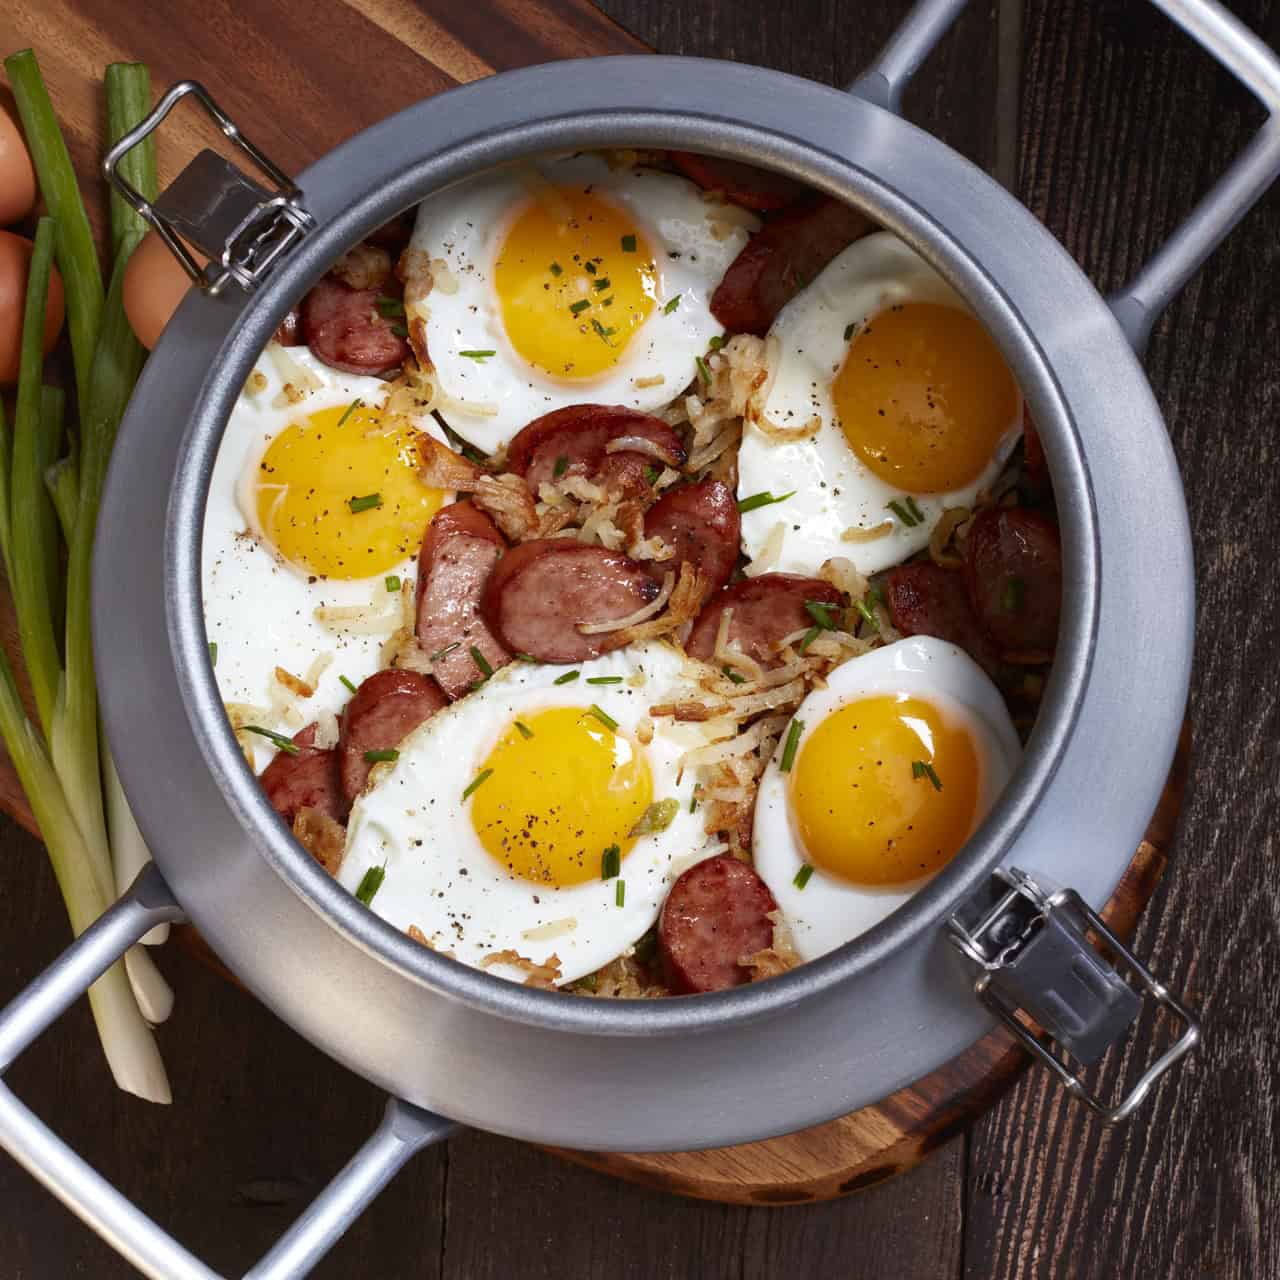 https://www.cancooker.com/wp-content/uploads/2020/10/products-US_CanCKR_Grar_Trky_Rope_OnePotCampersHash_OH_2__80409.1603201198.1280.1280.jpg